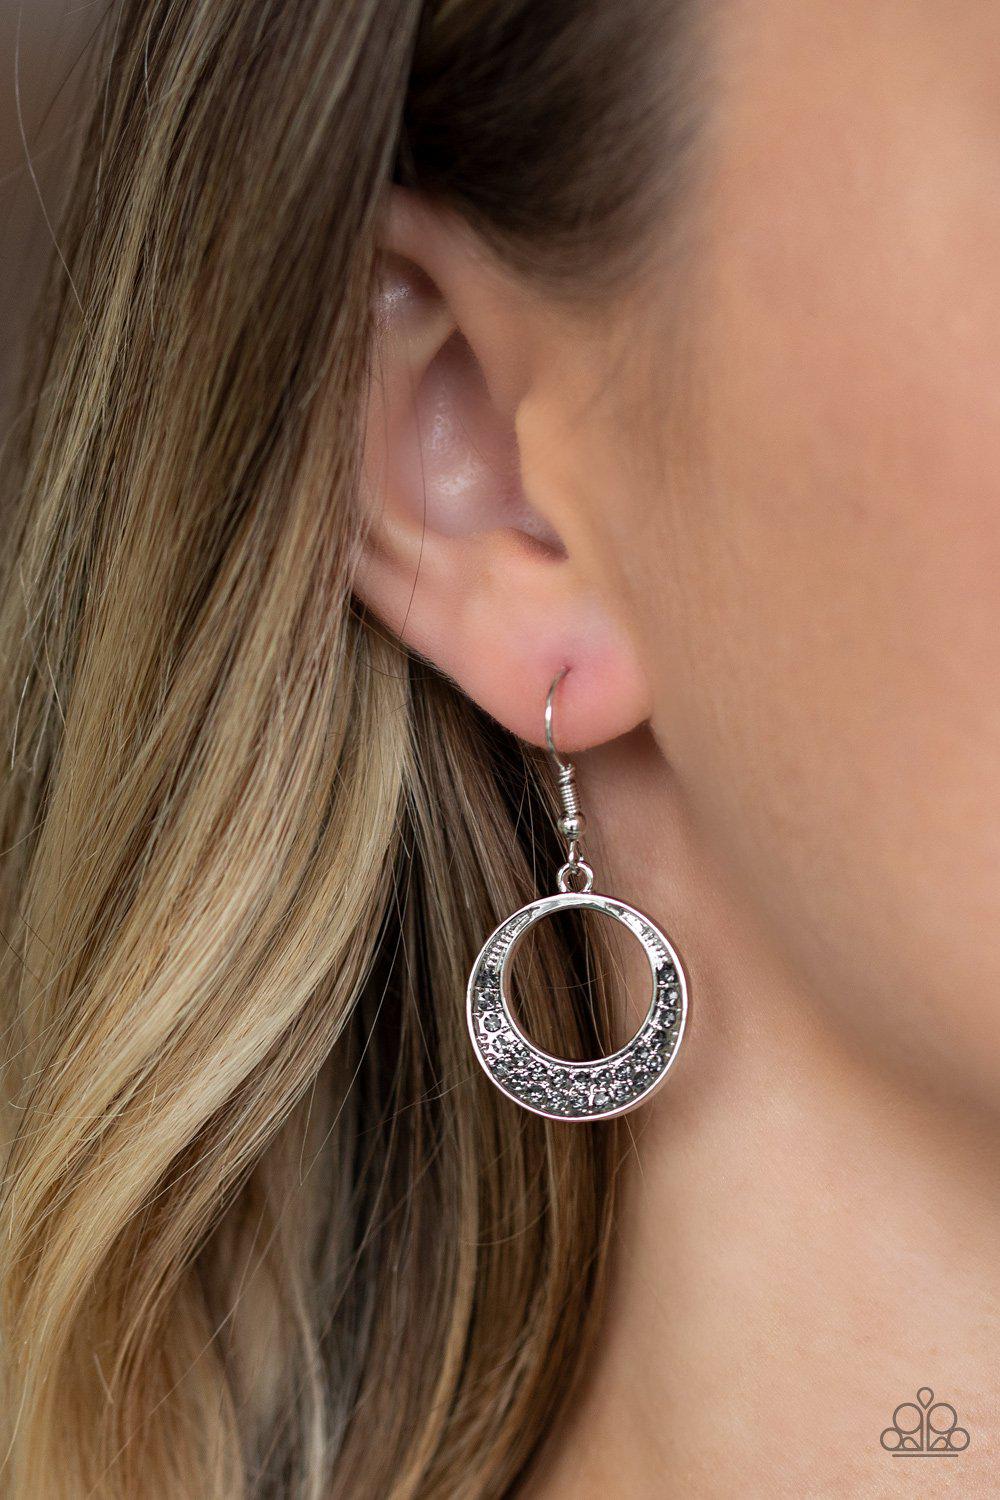 Socialite Luster Silver Rhinestone Earrings - Paparazzi Accessories-CarasShop.com - $5 Jewelry by Cara Jewels